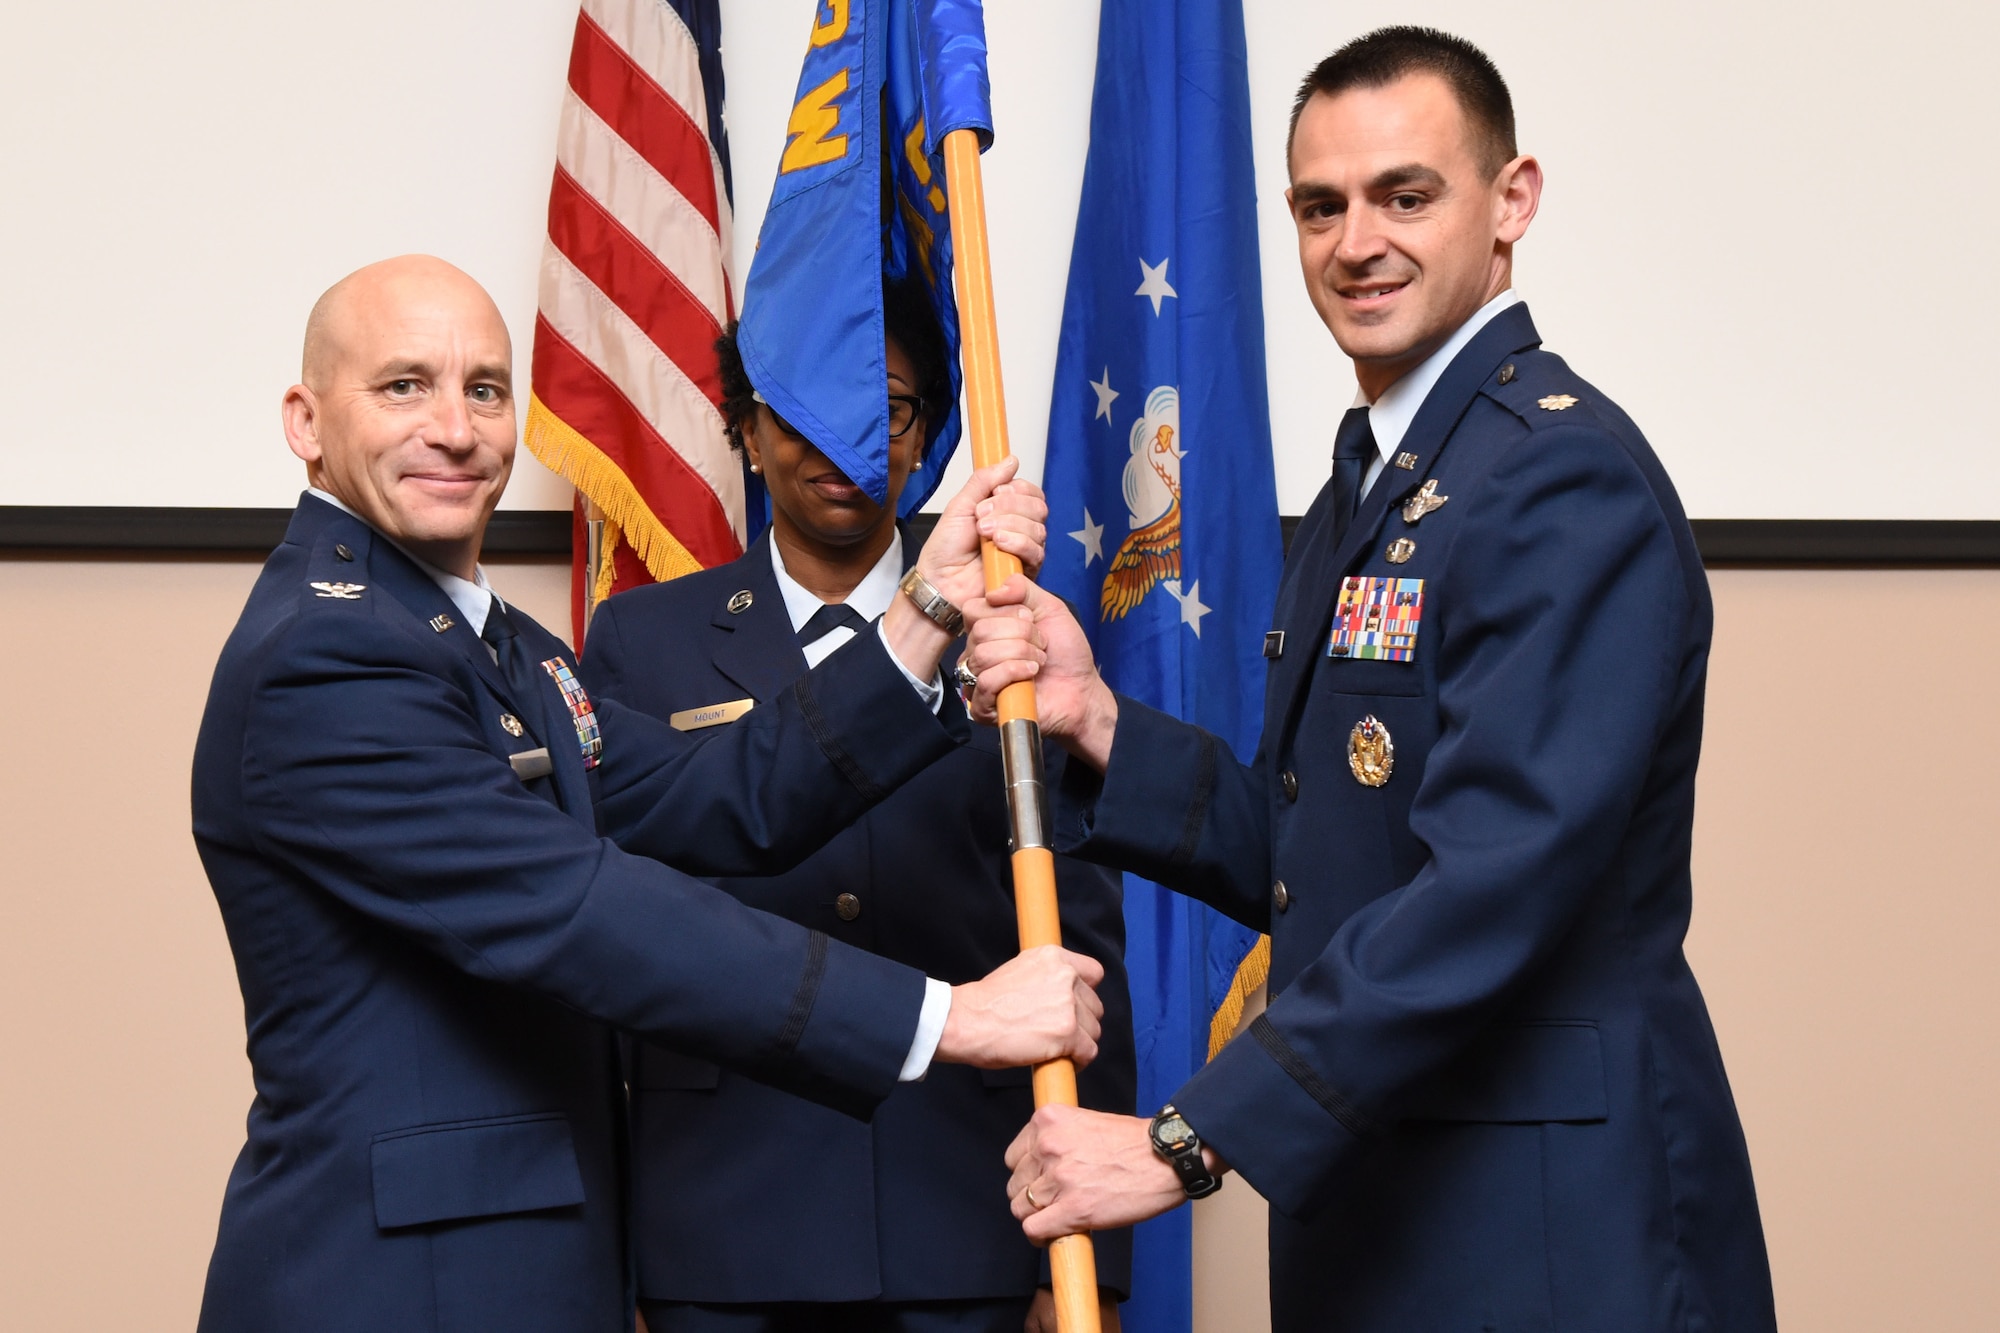 Col. David Condit, 403rd Operations Group commander, passes the 815th Airlift Squadron guide on to Lt. Col. Stuart Rubio, 815th AS commander, during a change of command ceremony January 30, 2016, at Keesler Air Force Base, Mississippi. Rubio took command of the 815th AS during the ceremony, which was held in the 815th AS building. (U.S. Air Force photo/Tech. Sgt. Ryan Labadens)